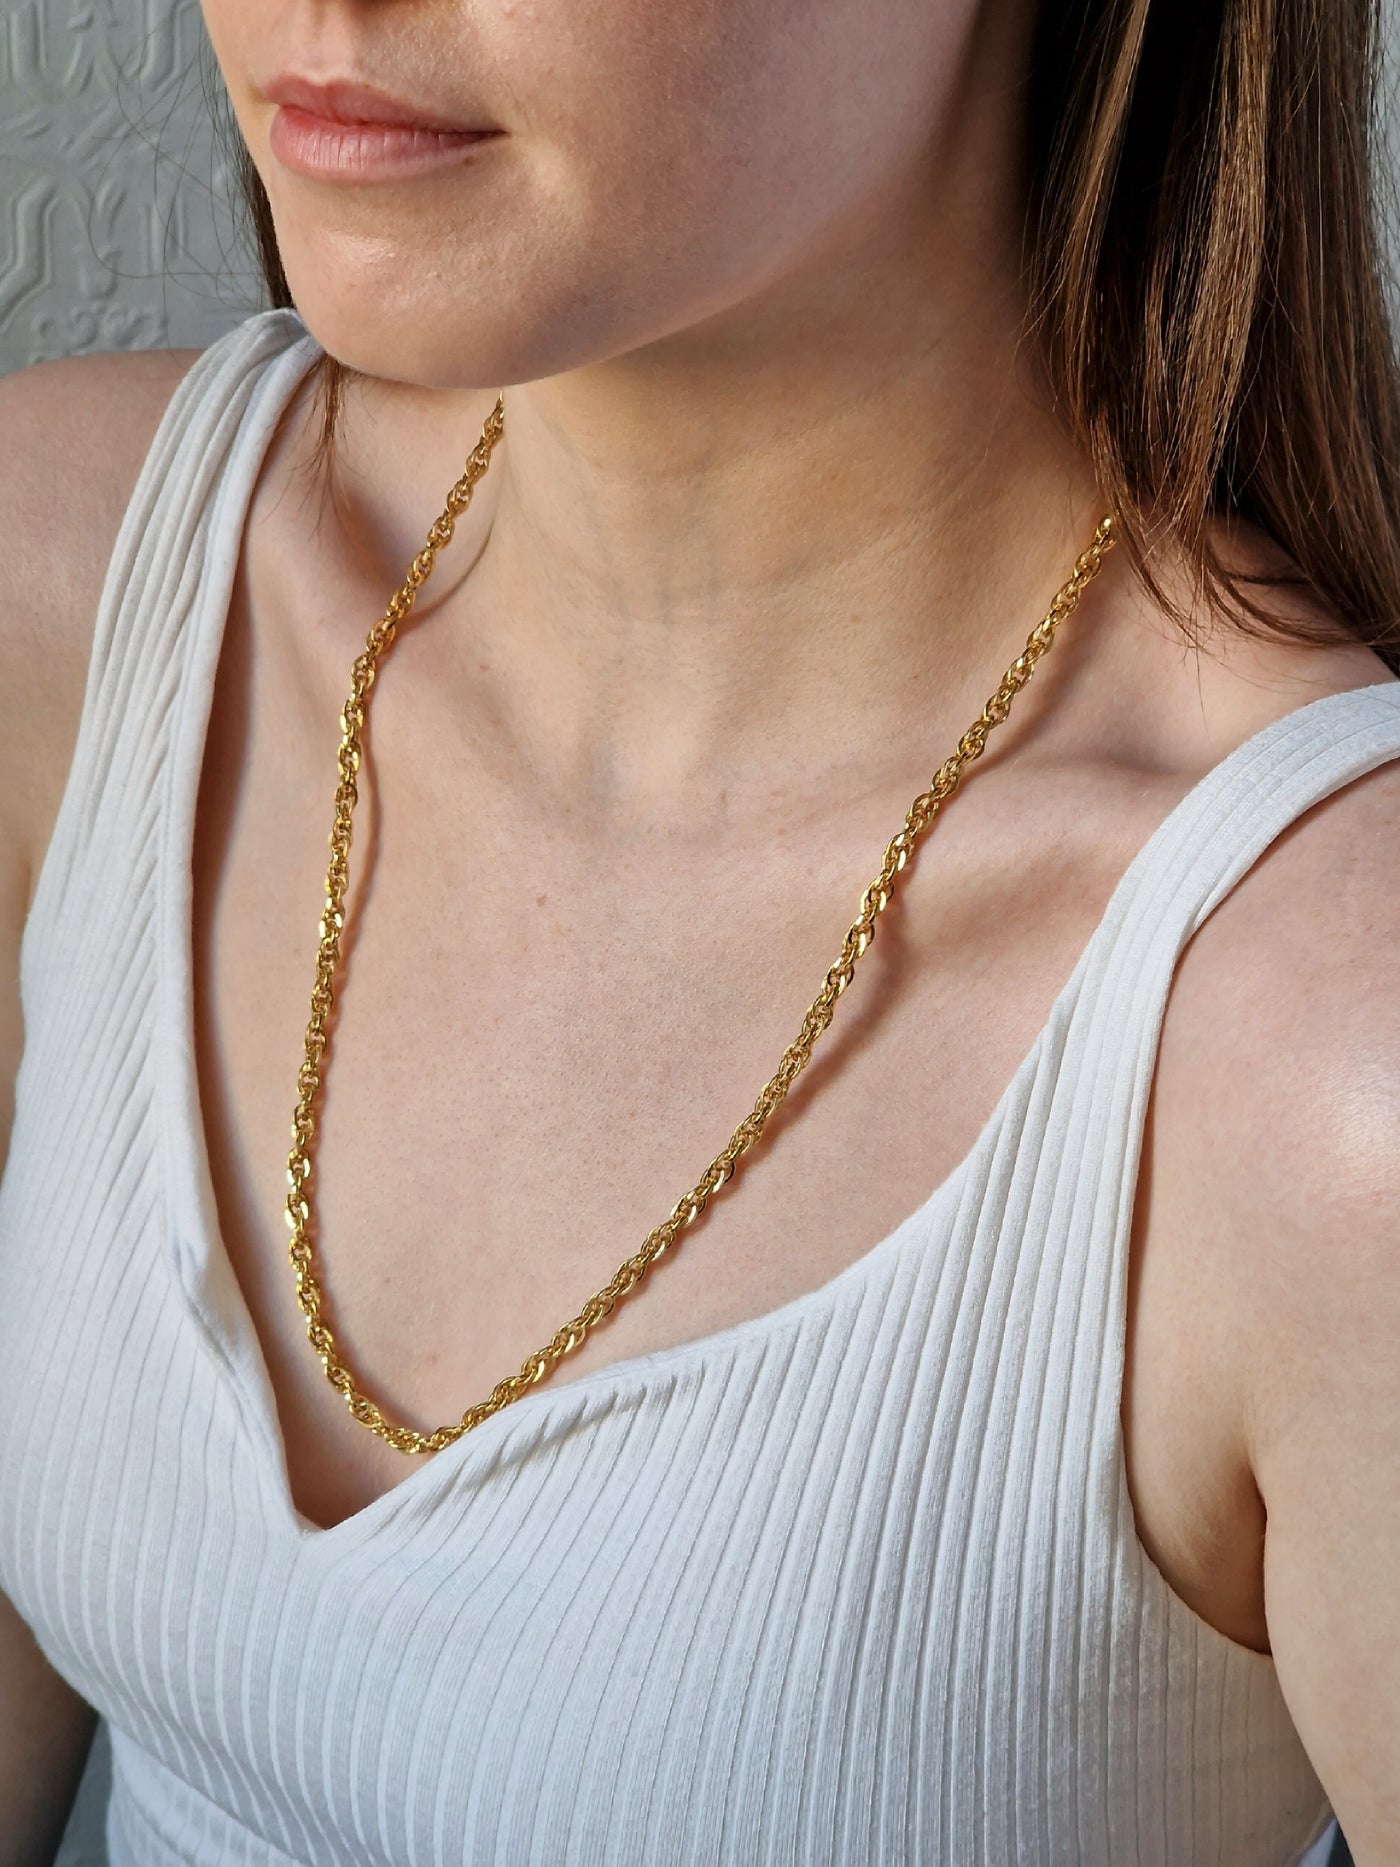 Vintage Gold Plated Wheat Chain Necklace 24"